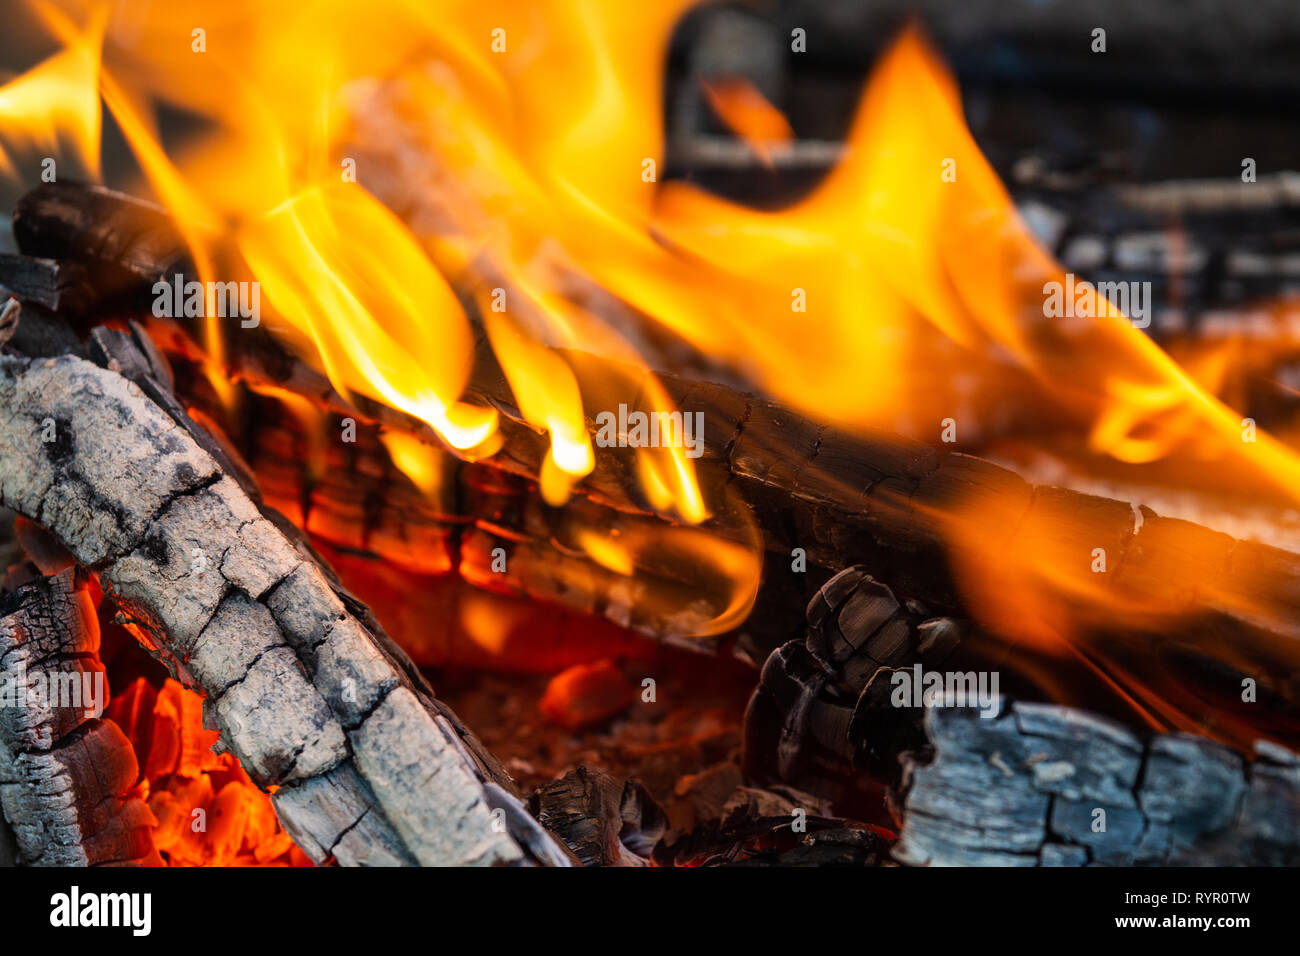 Image of burning firewood. Fire, flames, charred wood. Closeup view. Warming and cozy background or backdrop Stock Photo